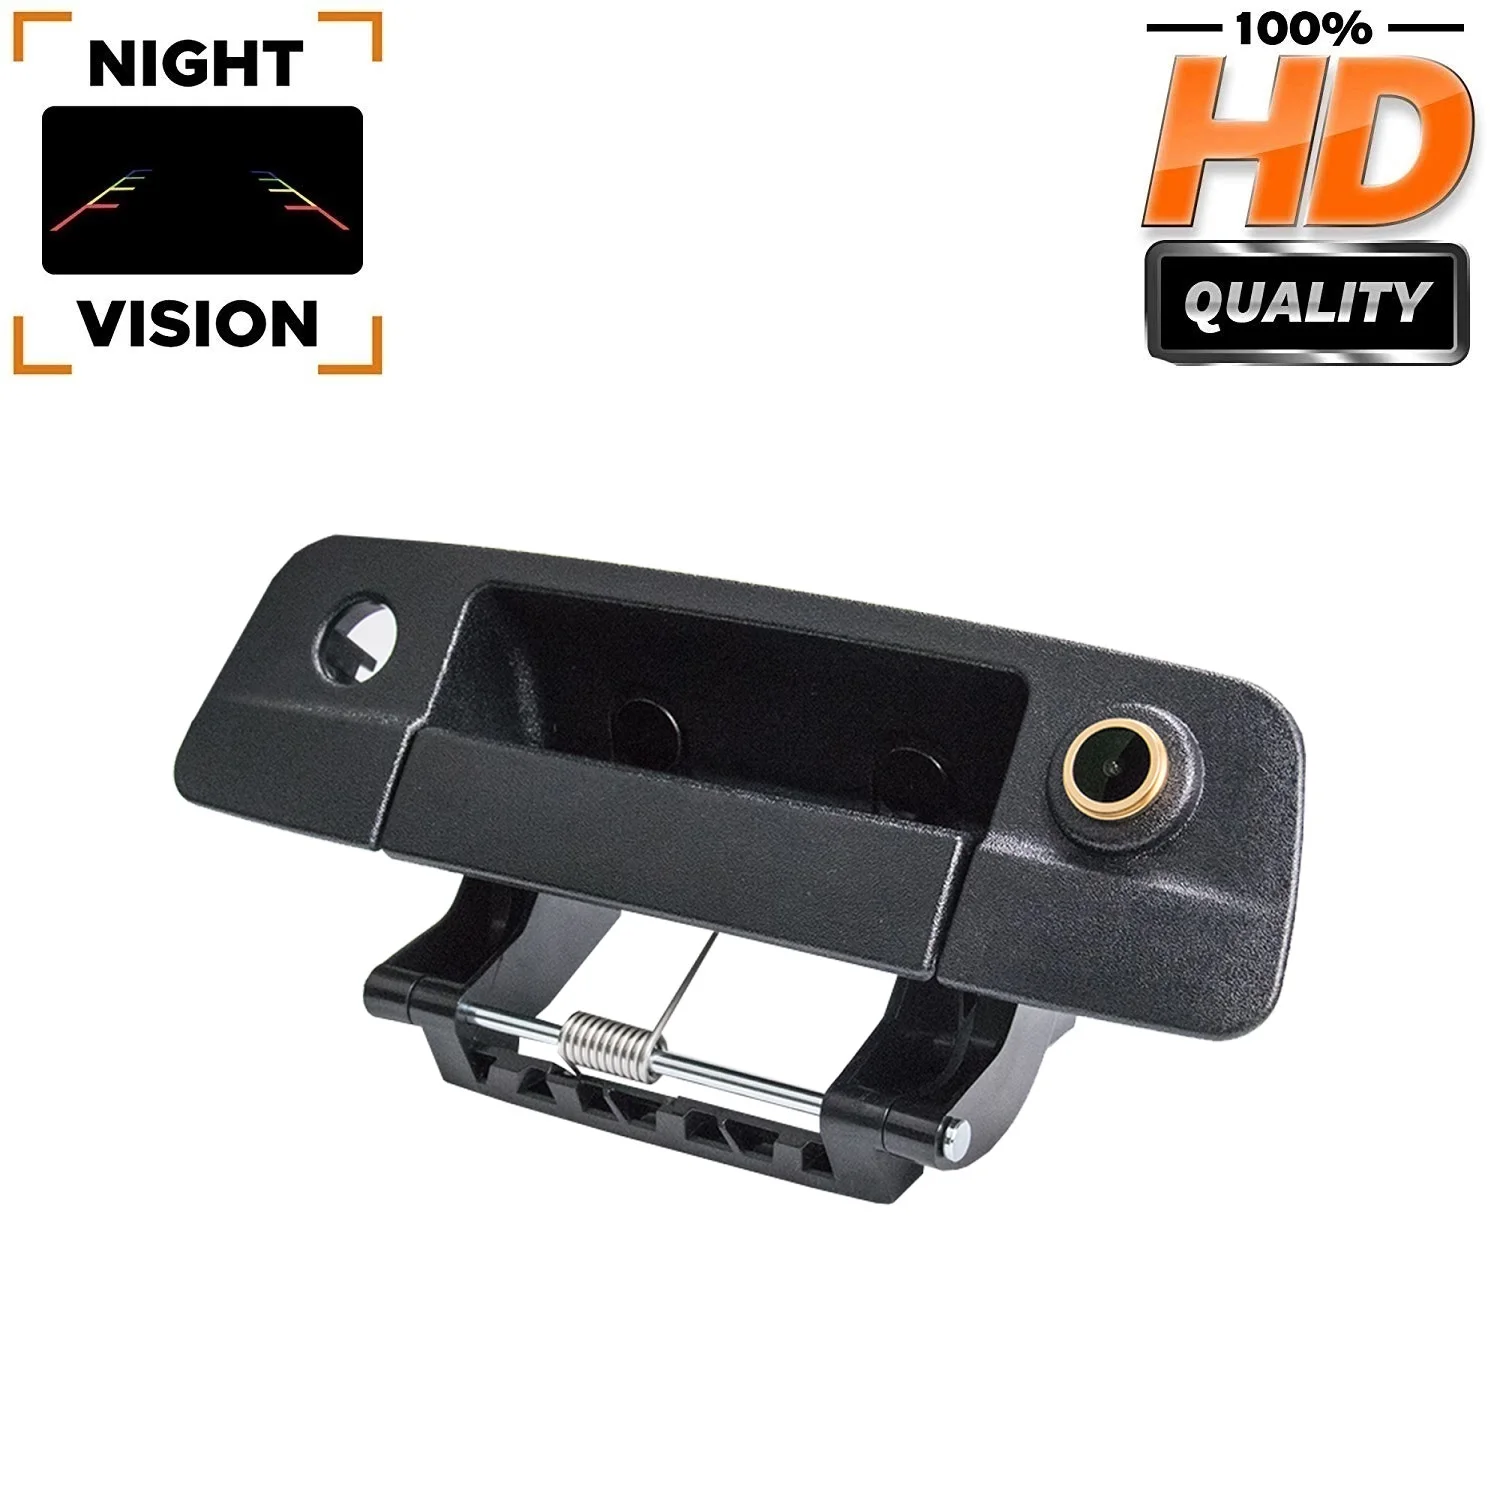 

HD 1280x720p Tailgate handle Camera for Pick-up Dodge Ram 1500 2500 3500 2009-2017, Night vision Rear View Waterproof Camera